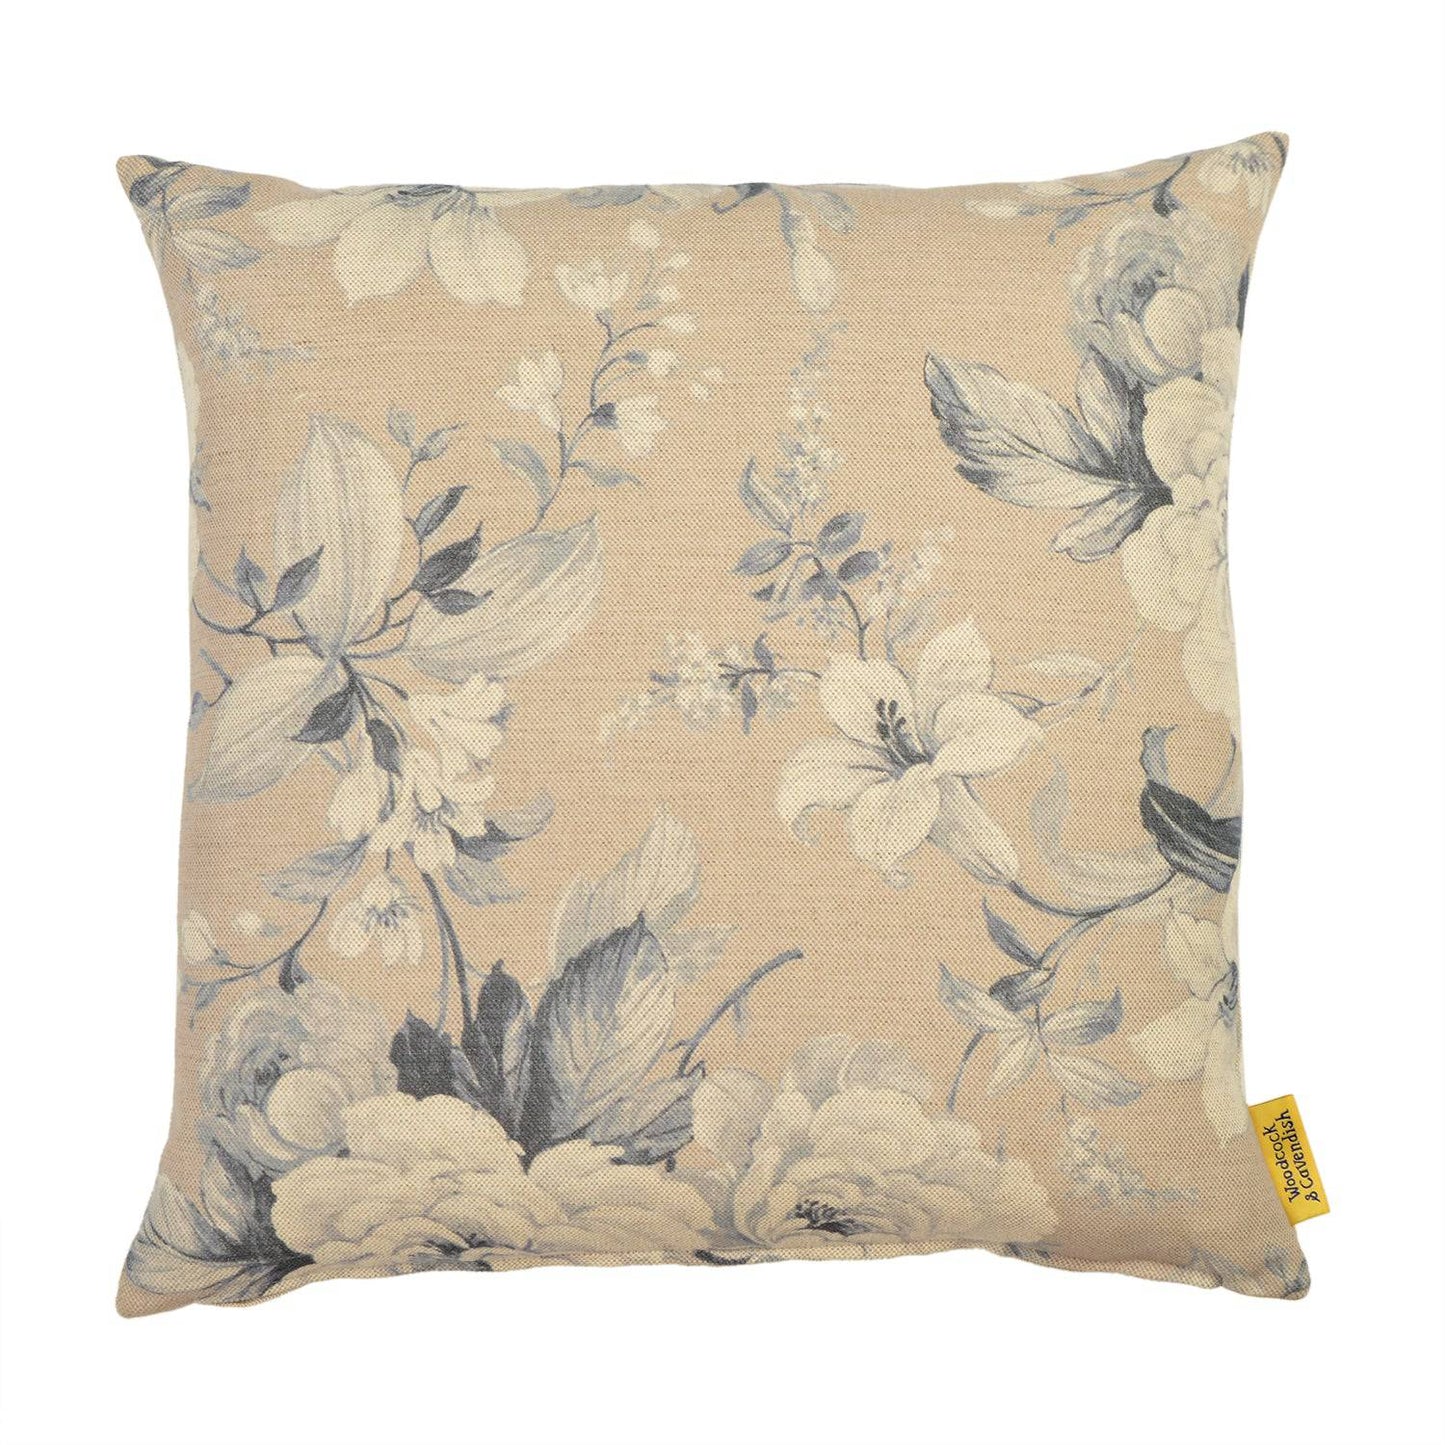 Blue Floral Linen Cushion by Woodcock & Cavendish for sale - Woodcock and Cavendish